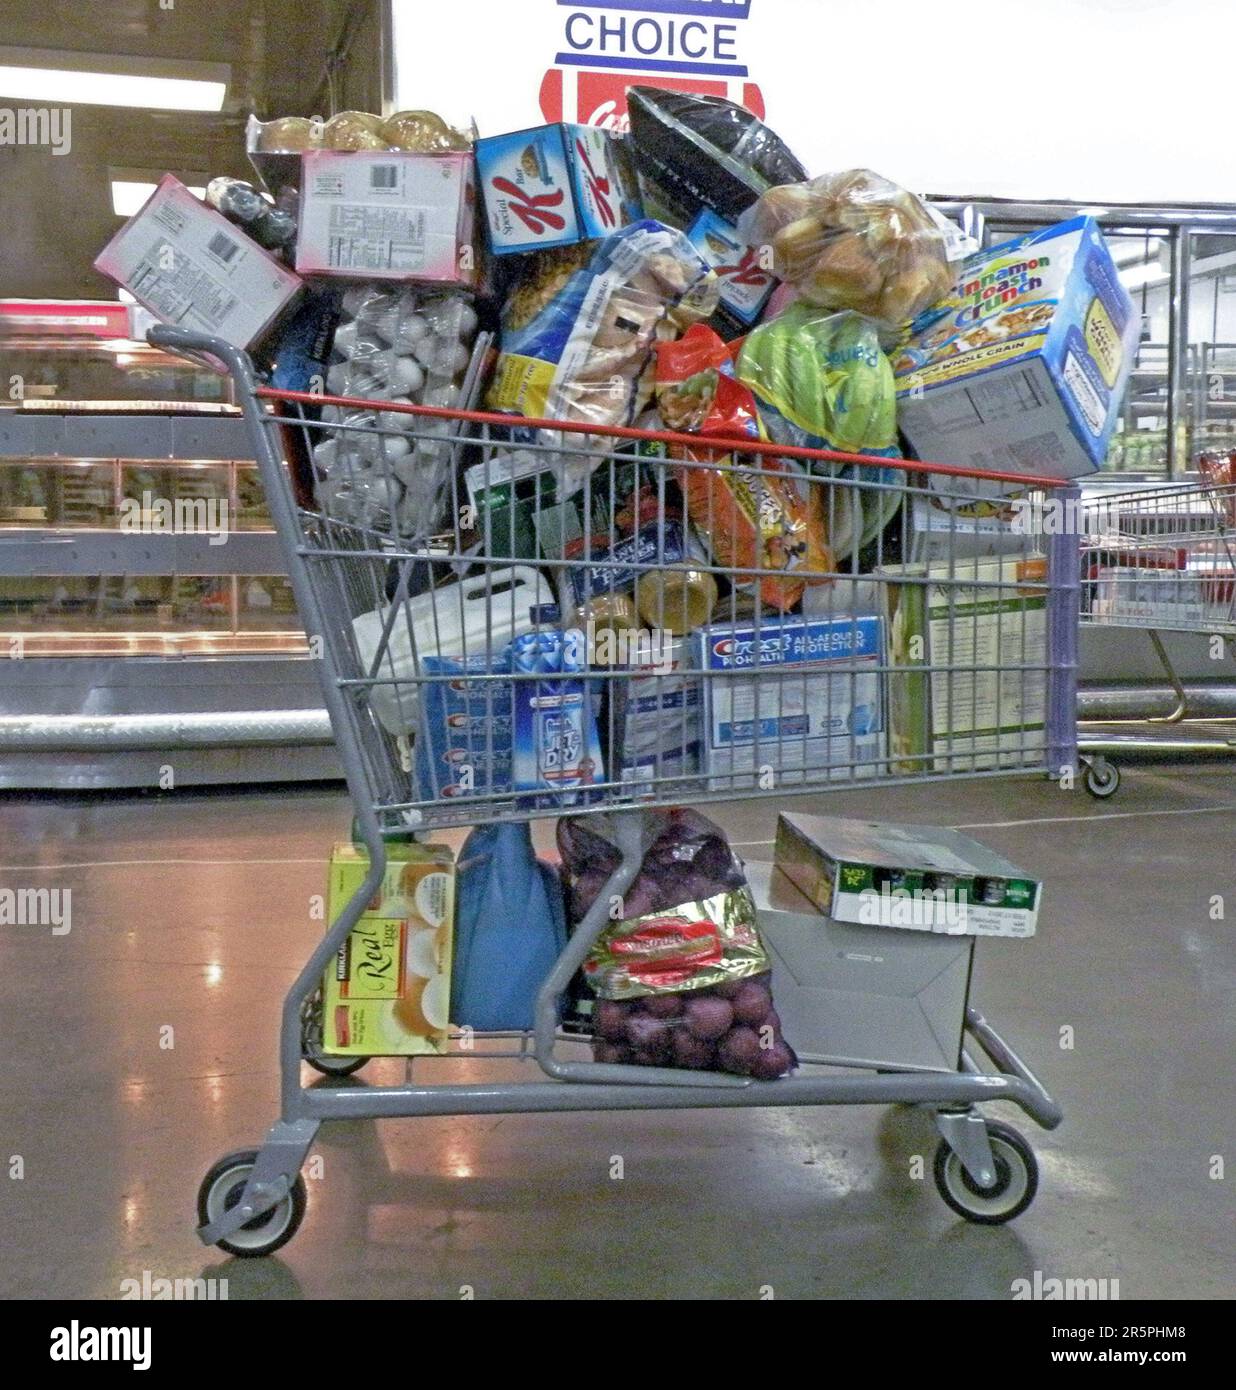 An overloaded shopping cart at a Costco discount supermarket in Queens, New York. Stock Photo